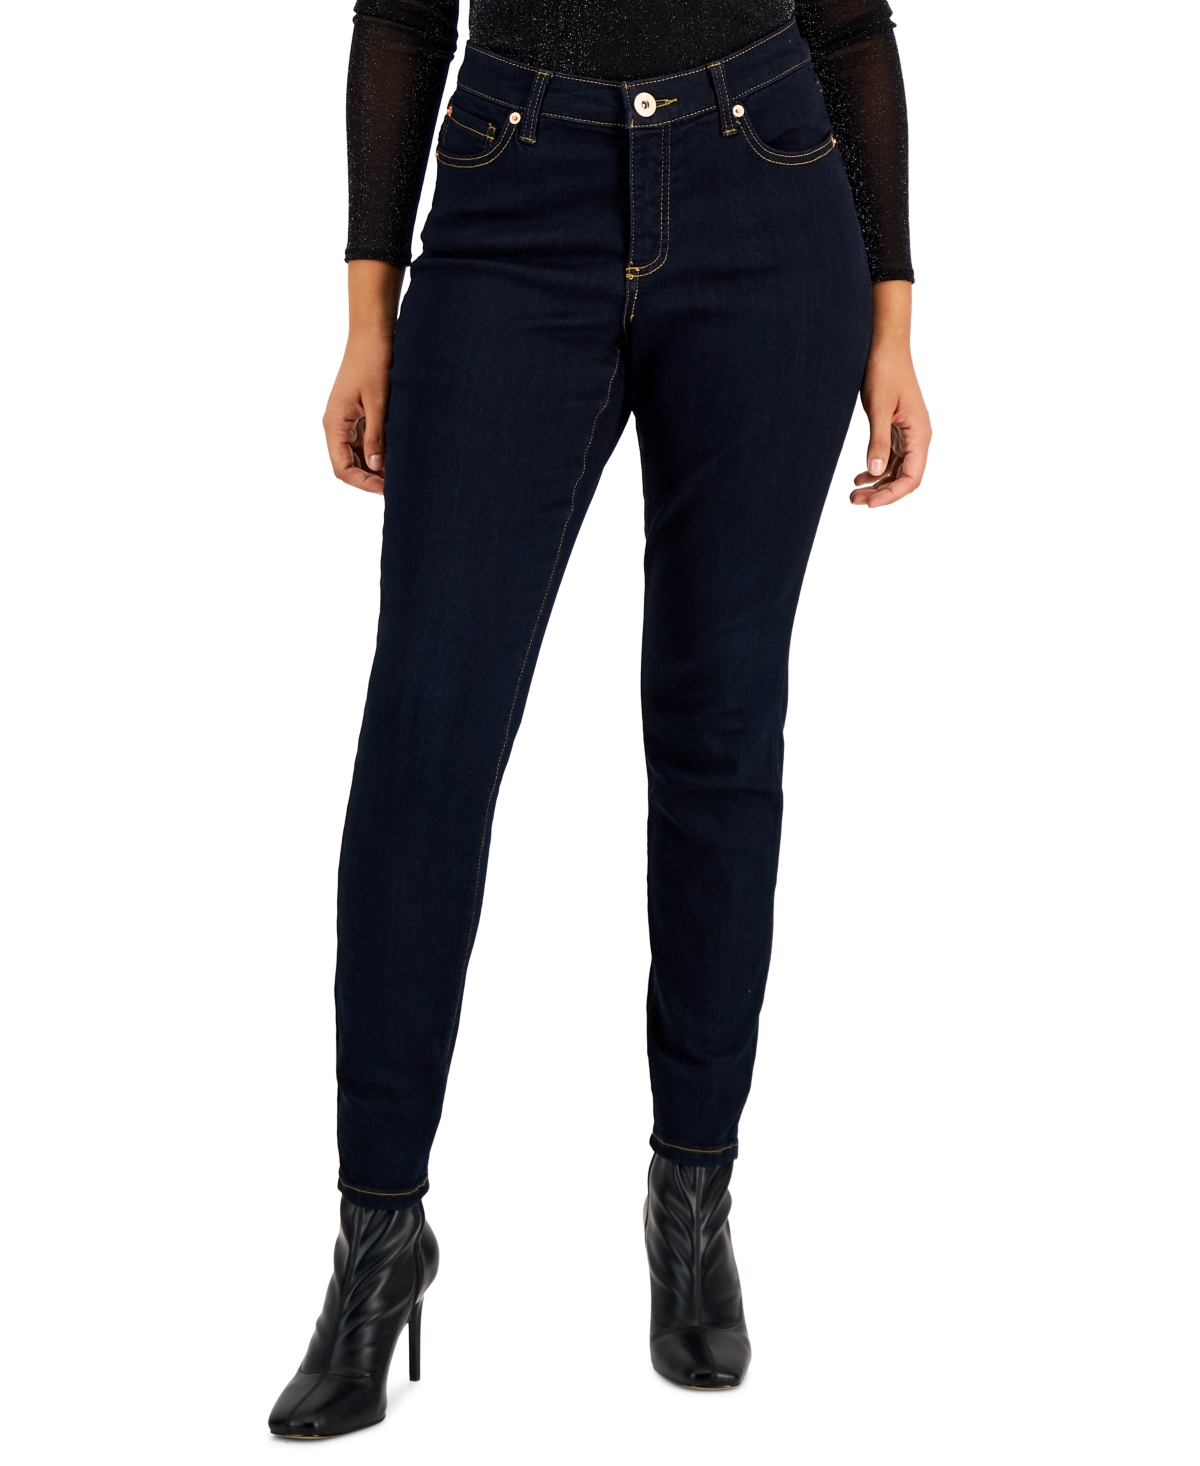  Inc International Concepts Women's Curvy Mid Rise Skinny Jeans, Created for Macy's